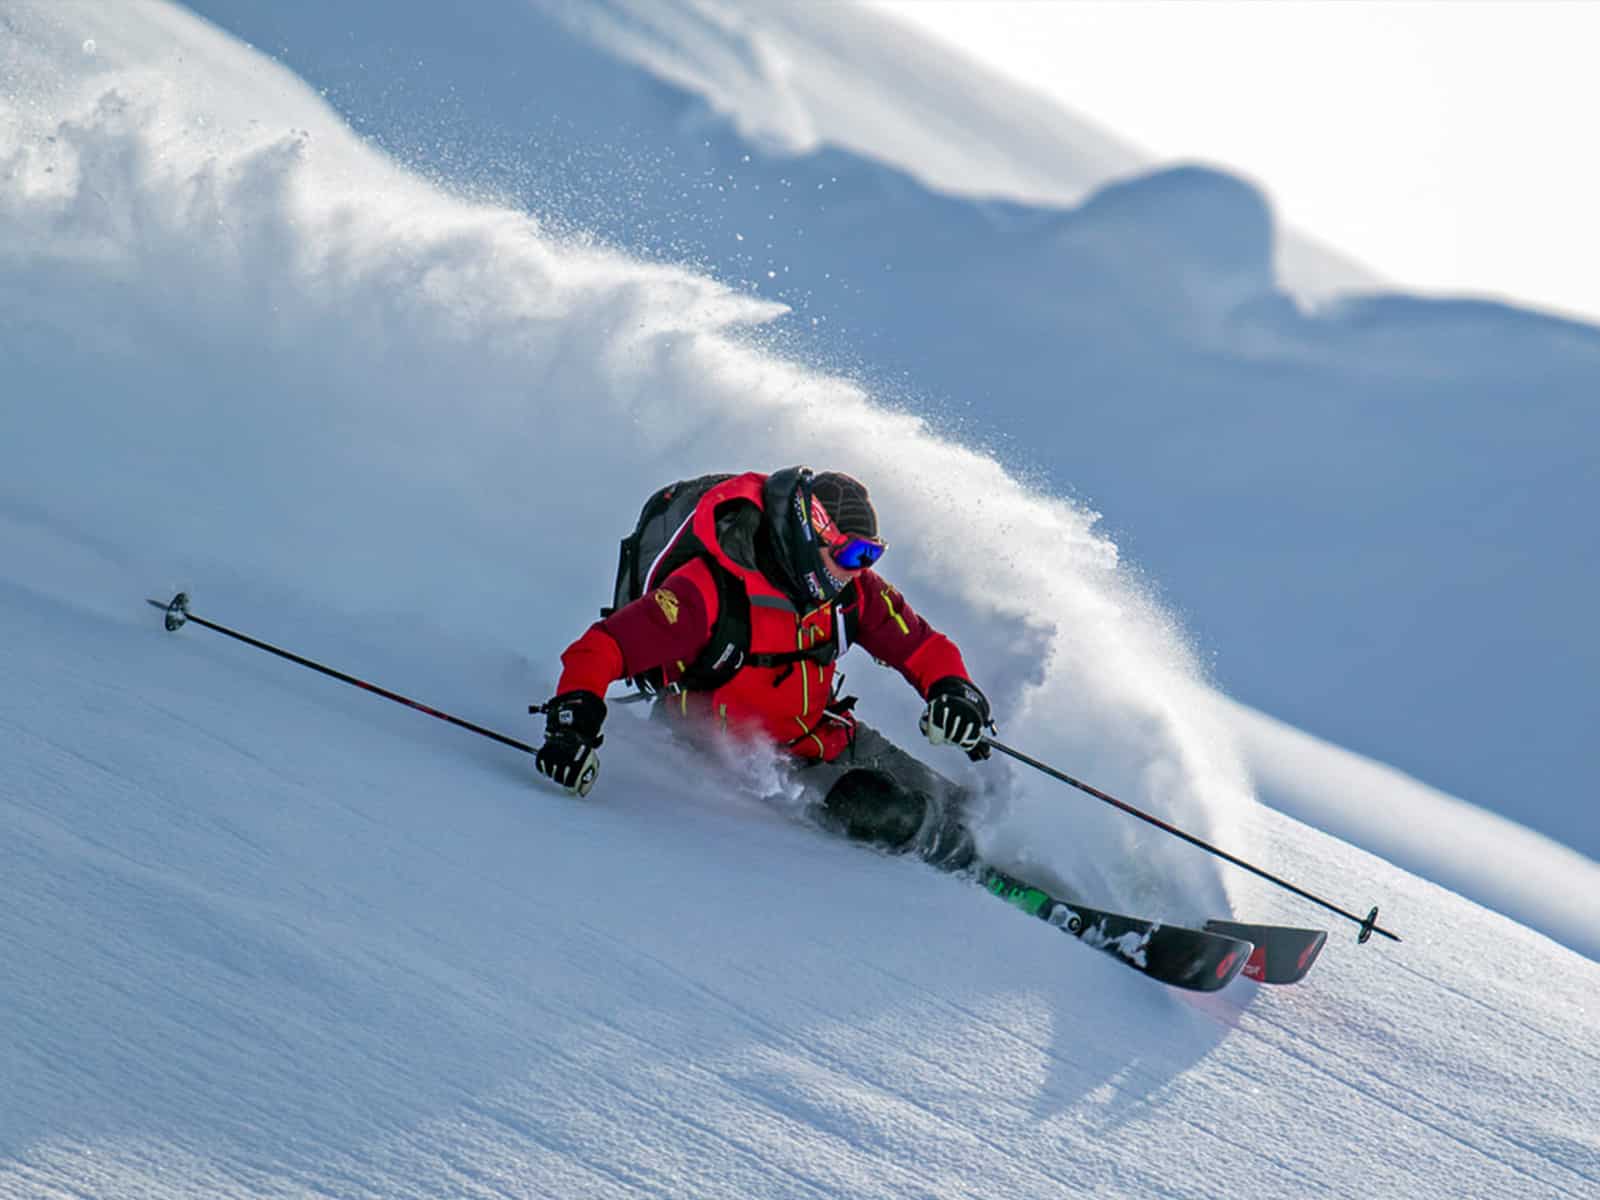 Close up of a skier going down a mountain with a cloud of snow behind him.